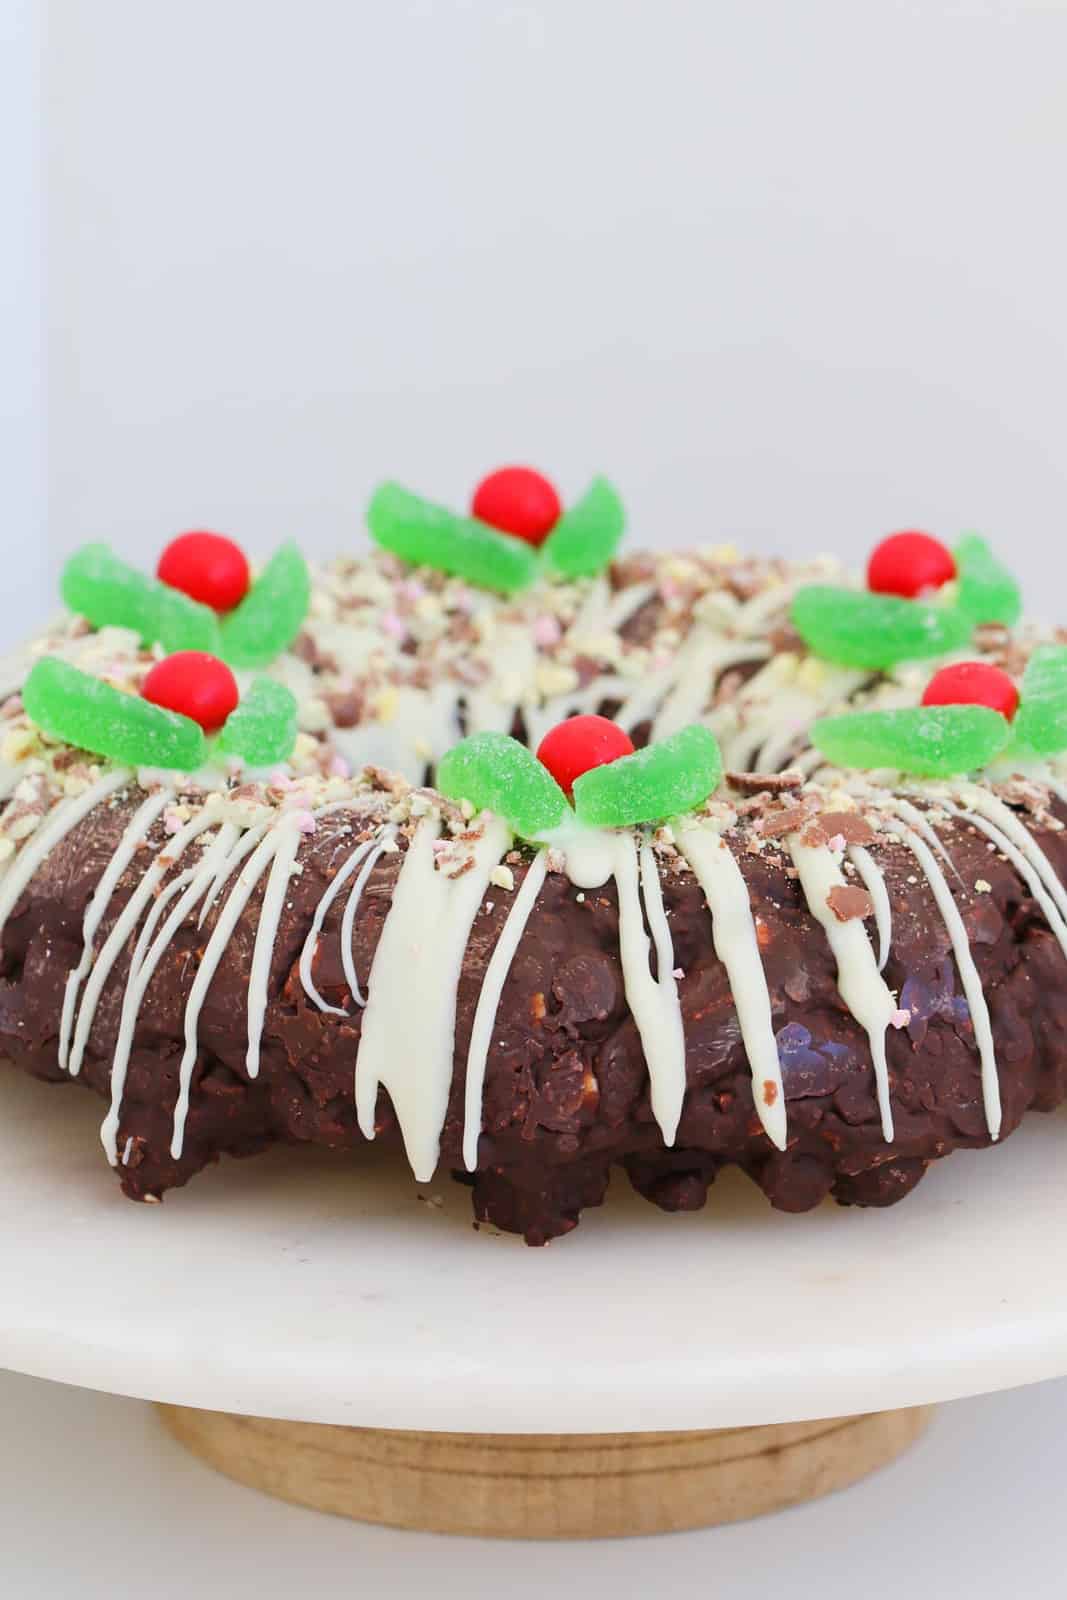 A chocolate rocky road shaped and decorated as a Christmas wreath.